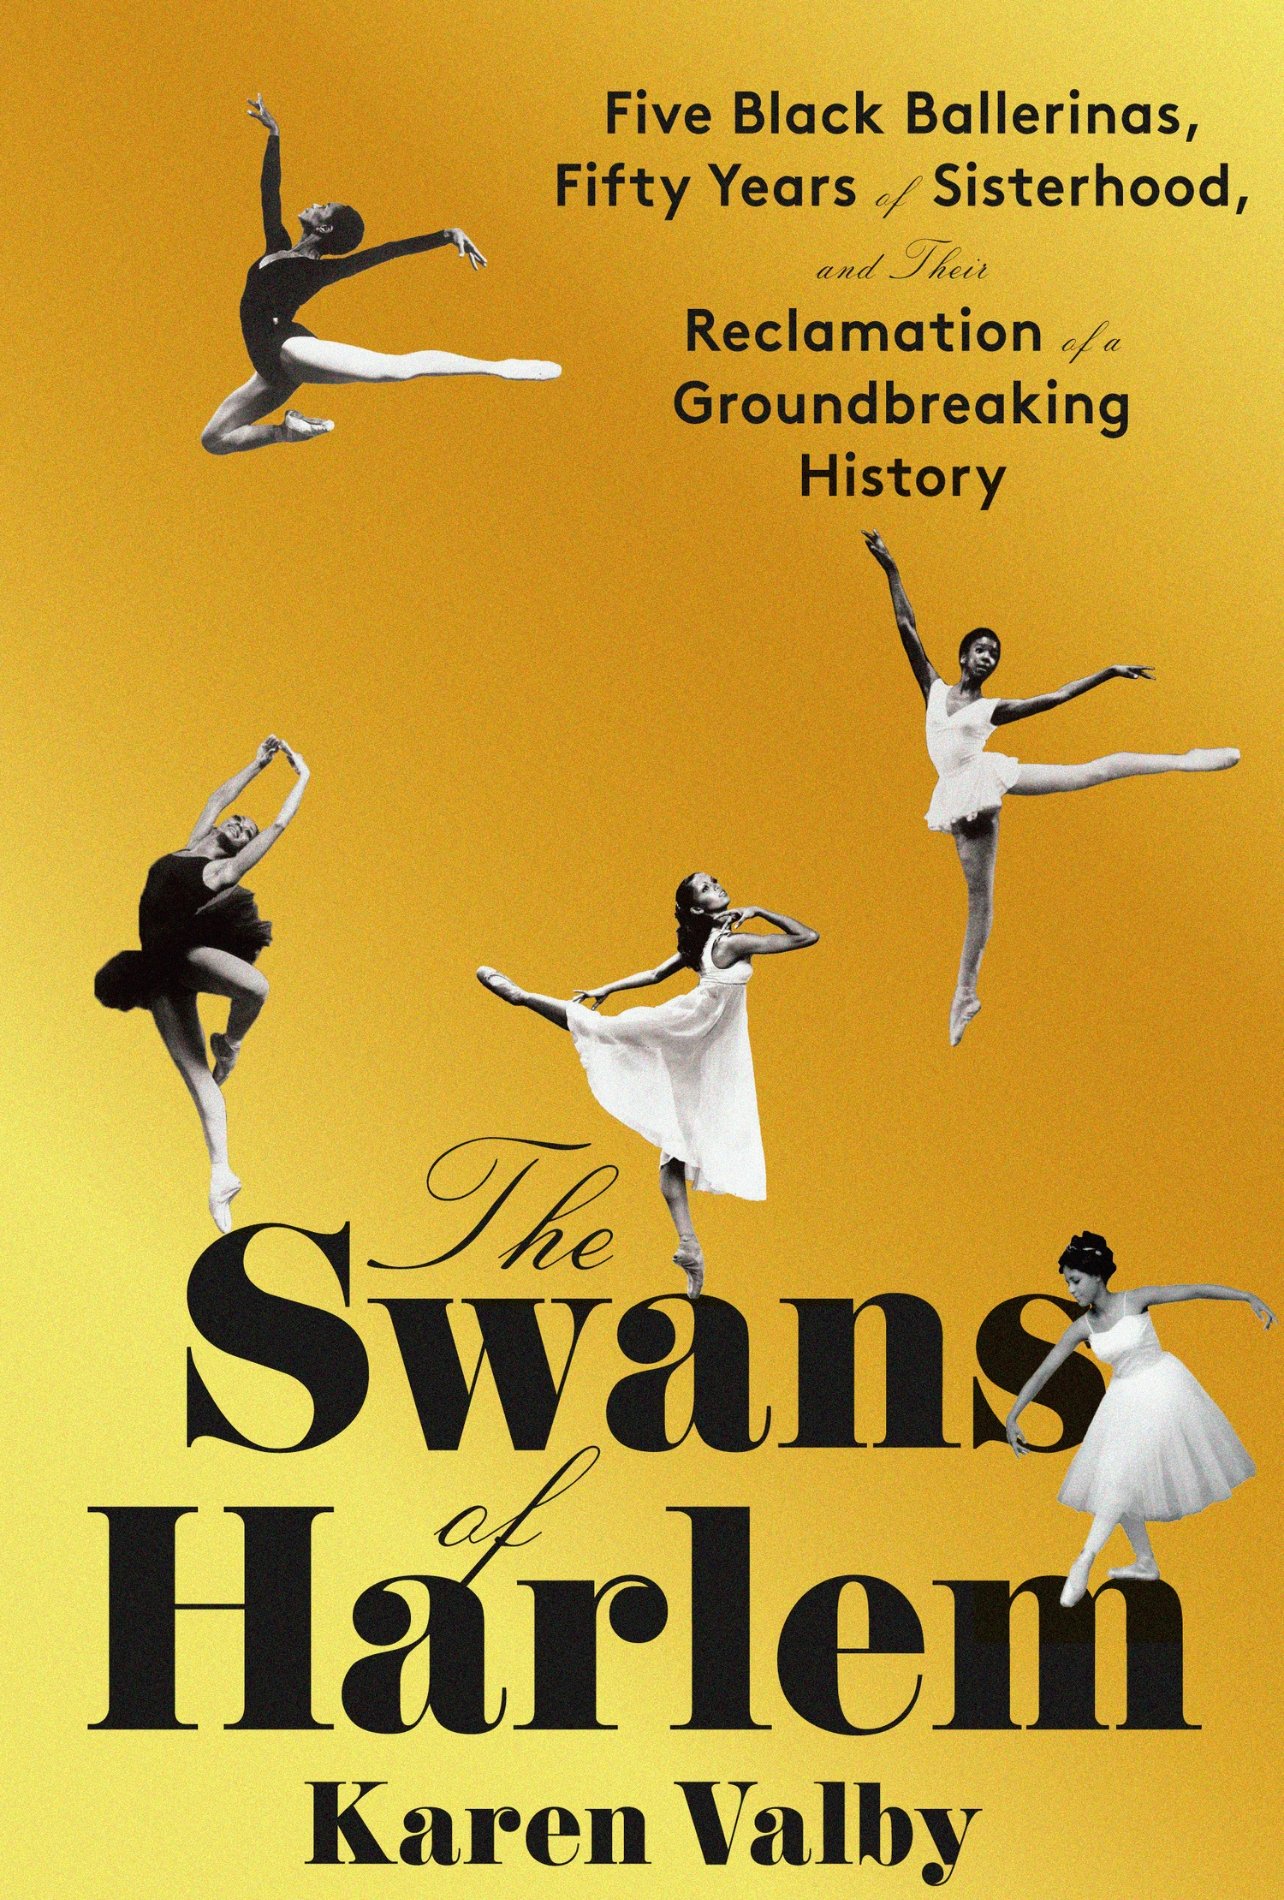 “The Swans of Harlem” book cover written by Karen Valby